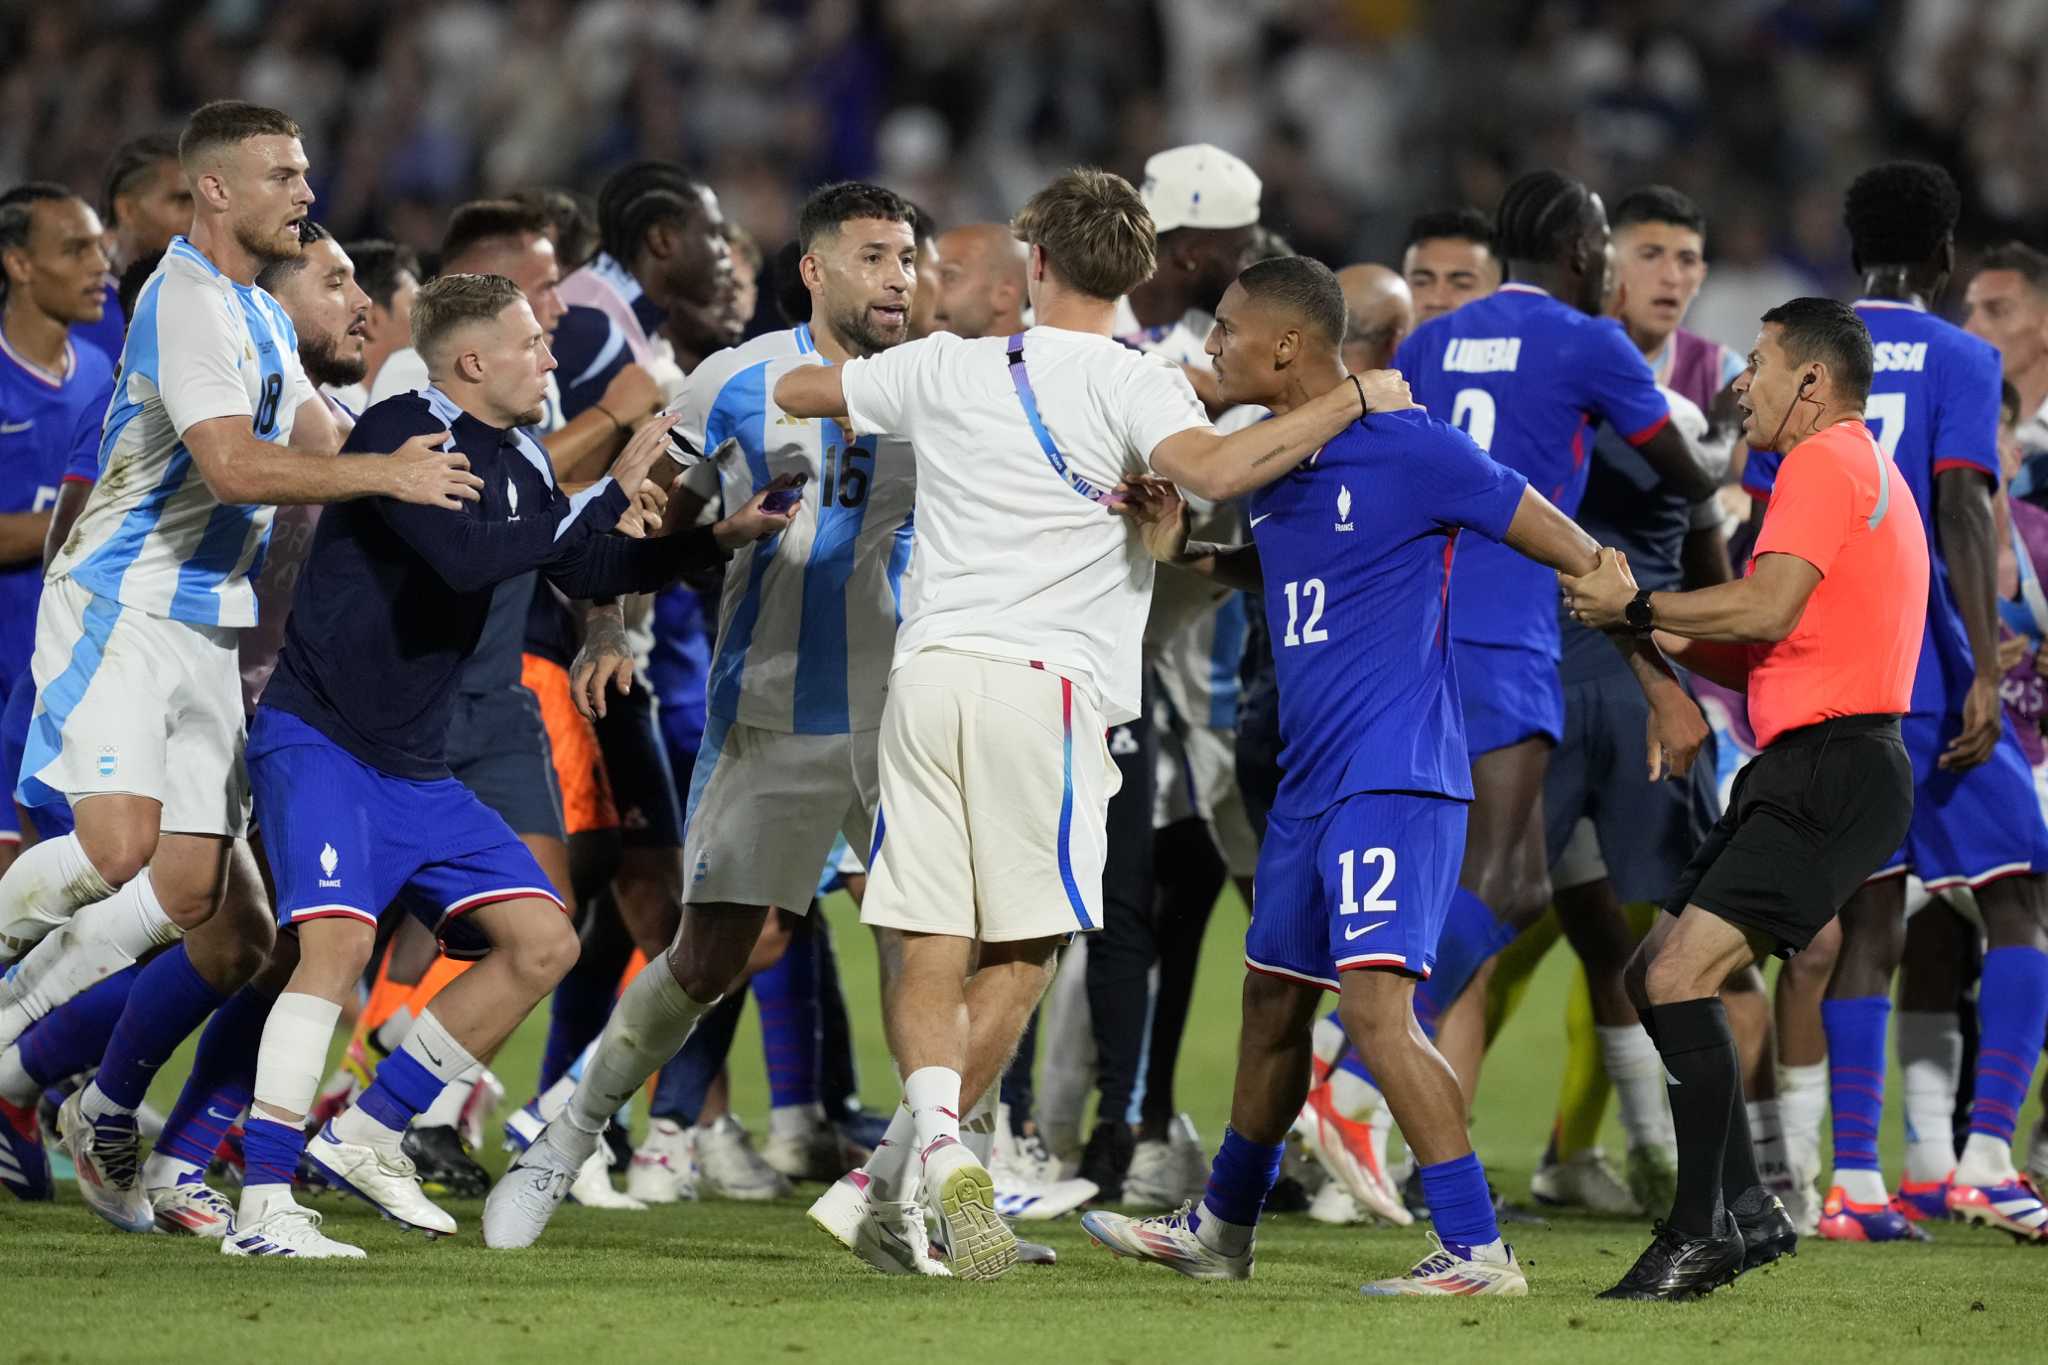 Offensive video gave France soccer players extra motivation to beat Argentina at Paris Olympics